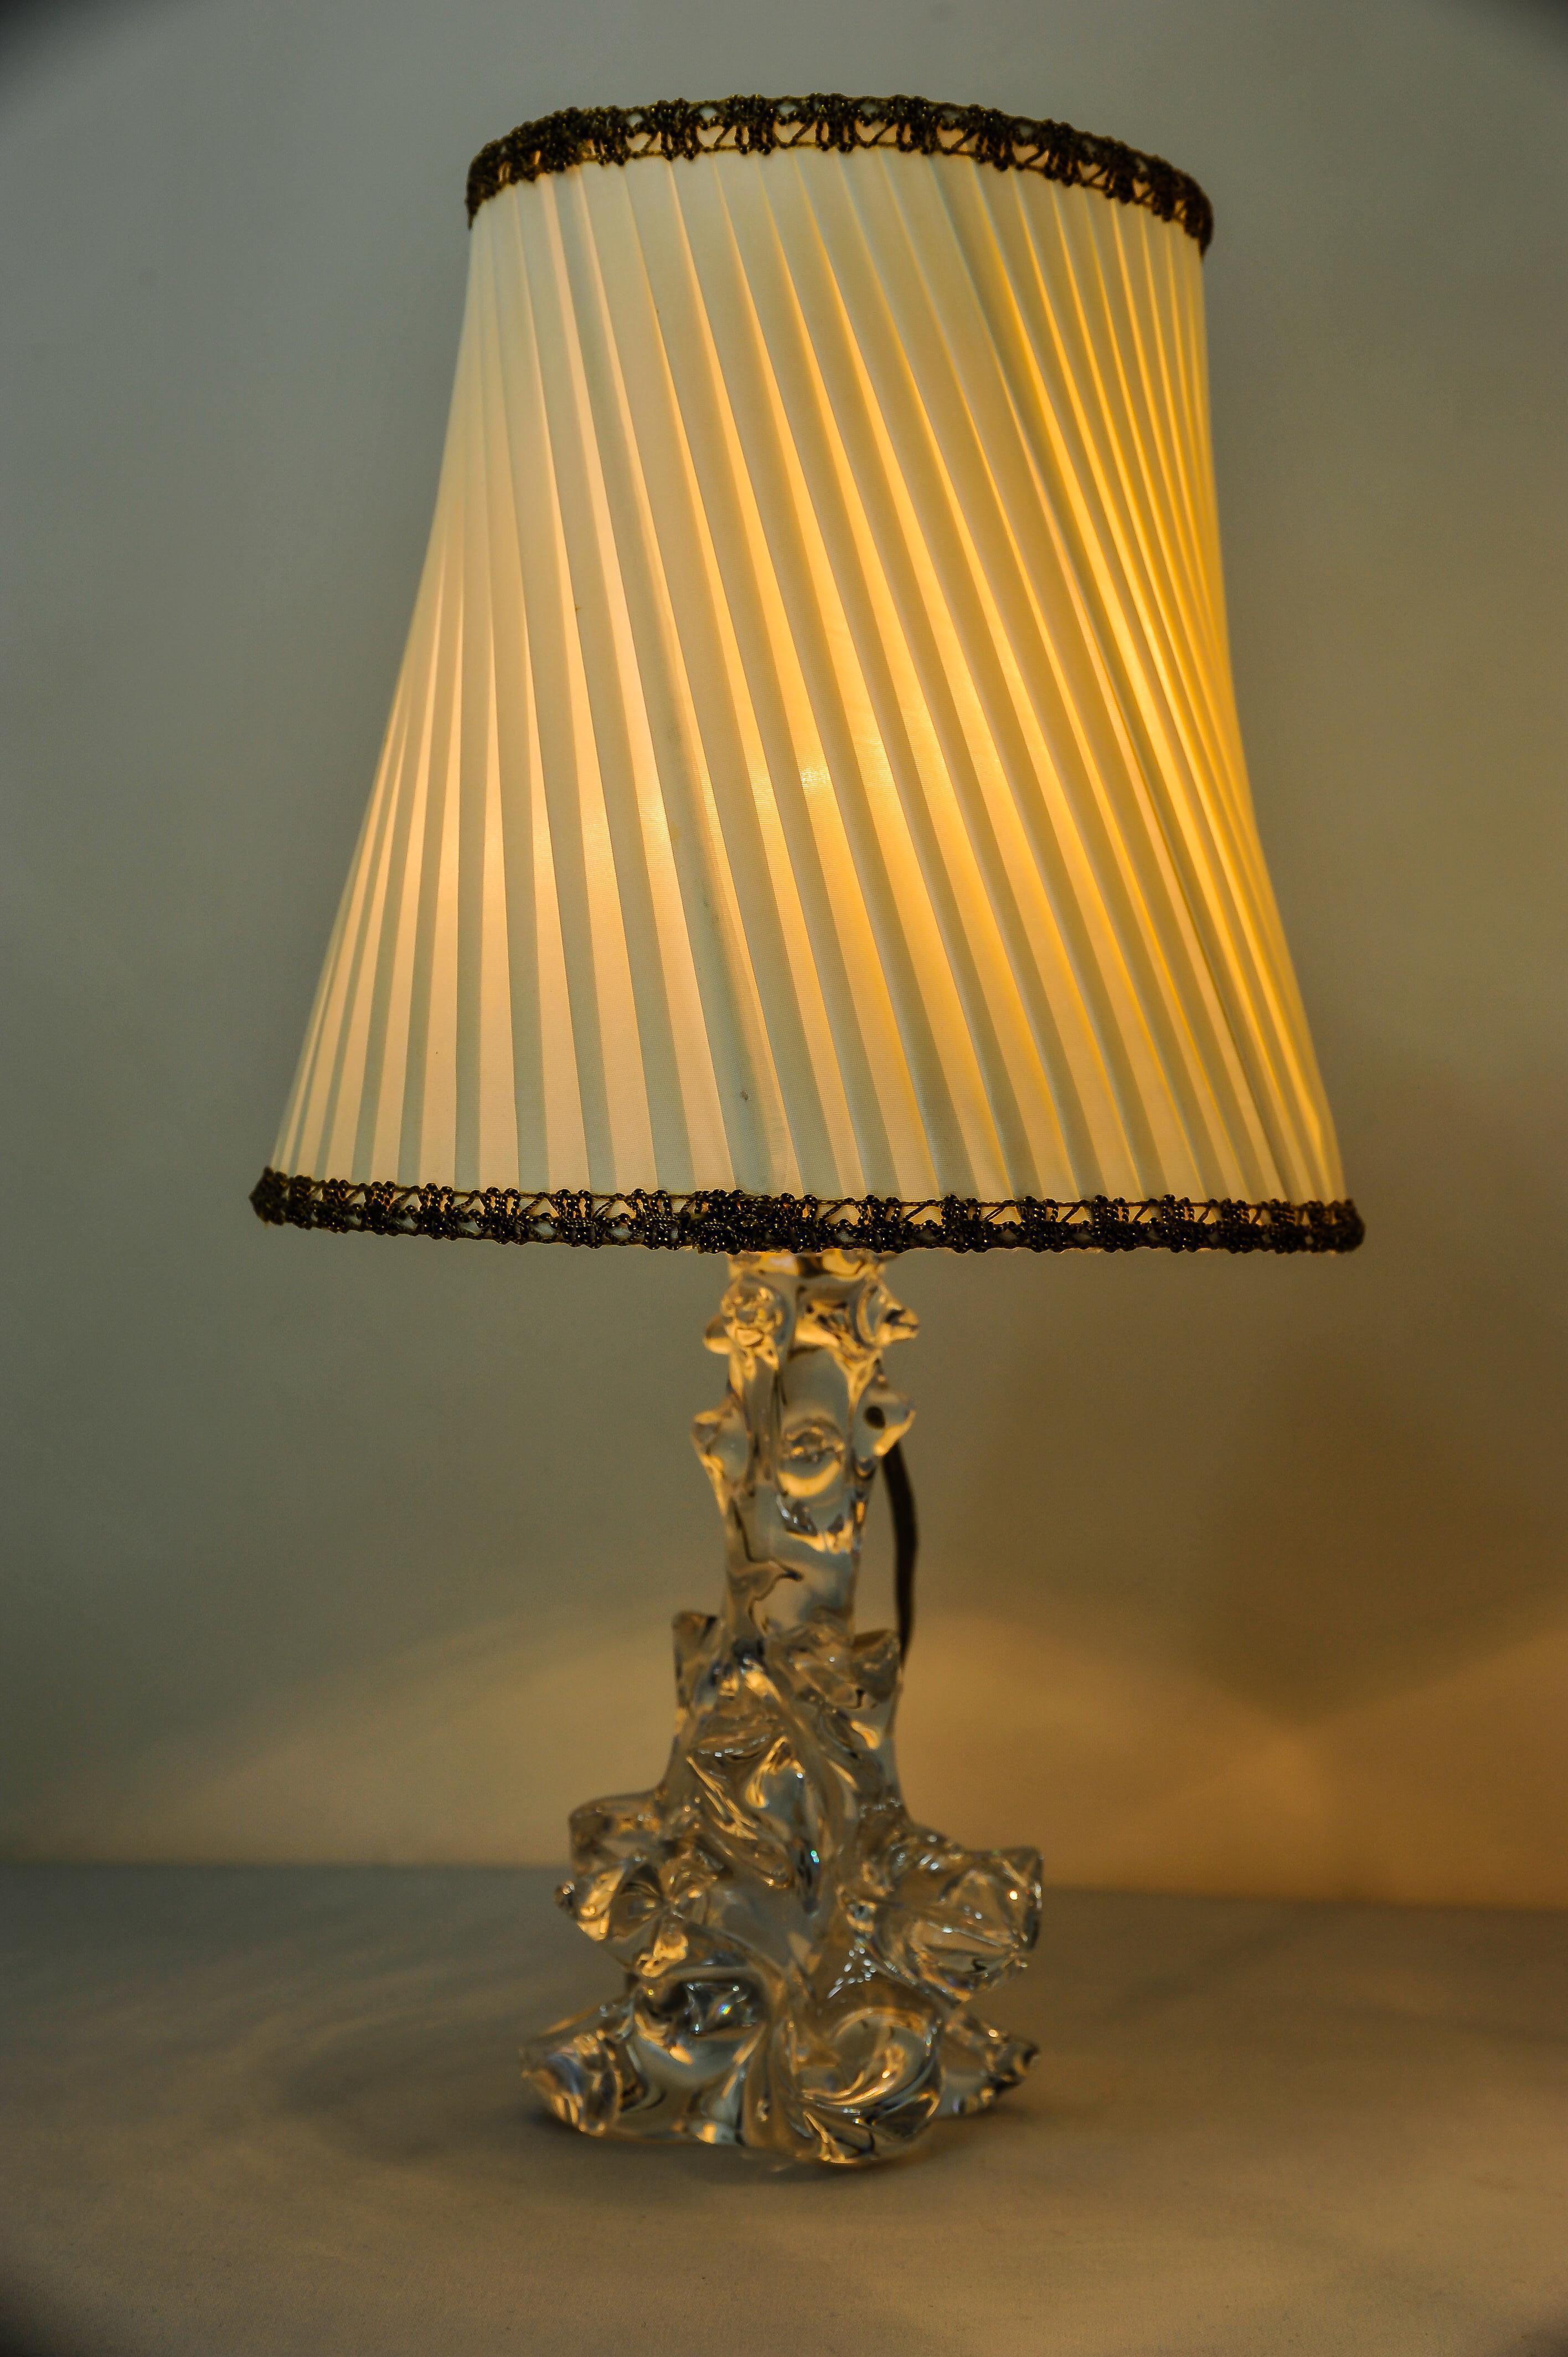 Two Charles Schneider Crystal Glass Table Lamps and Original Fabric Shades 1960s For Sale 3